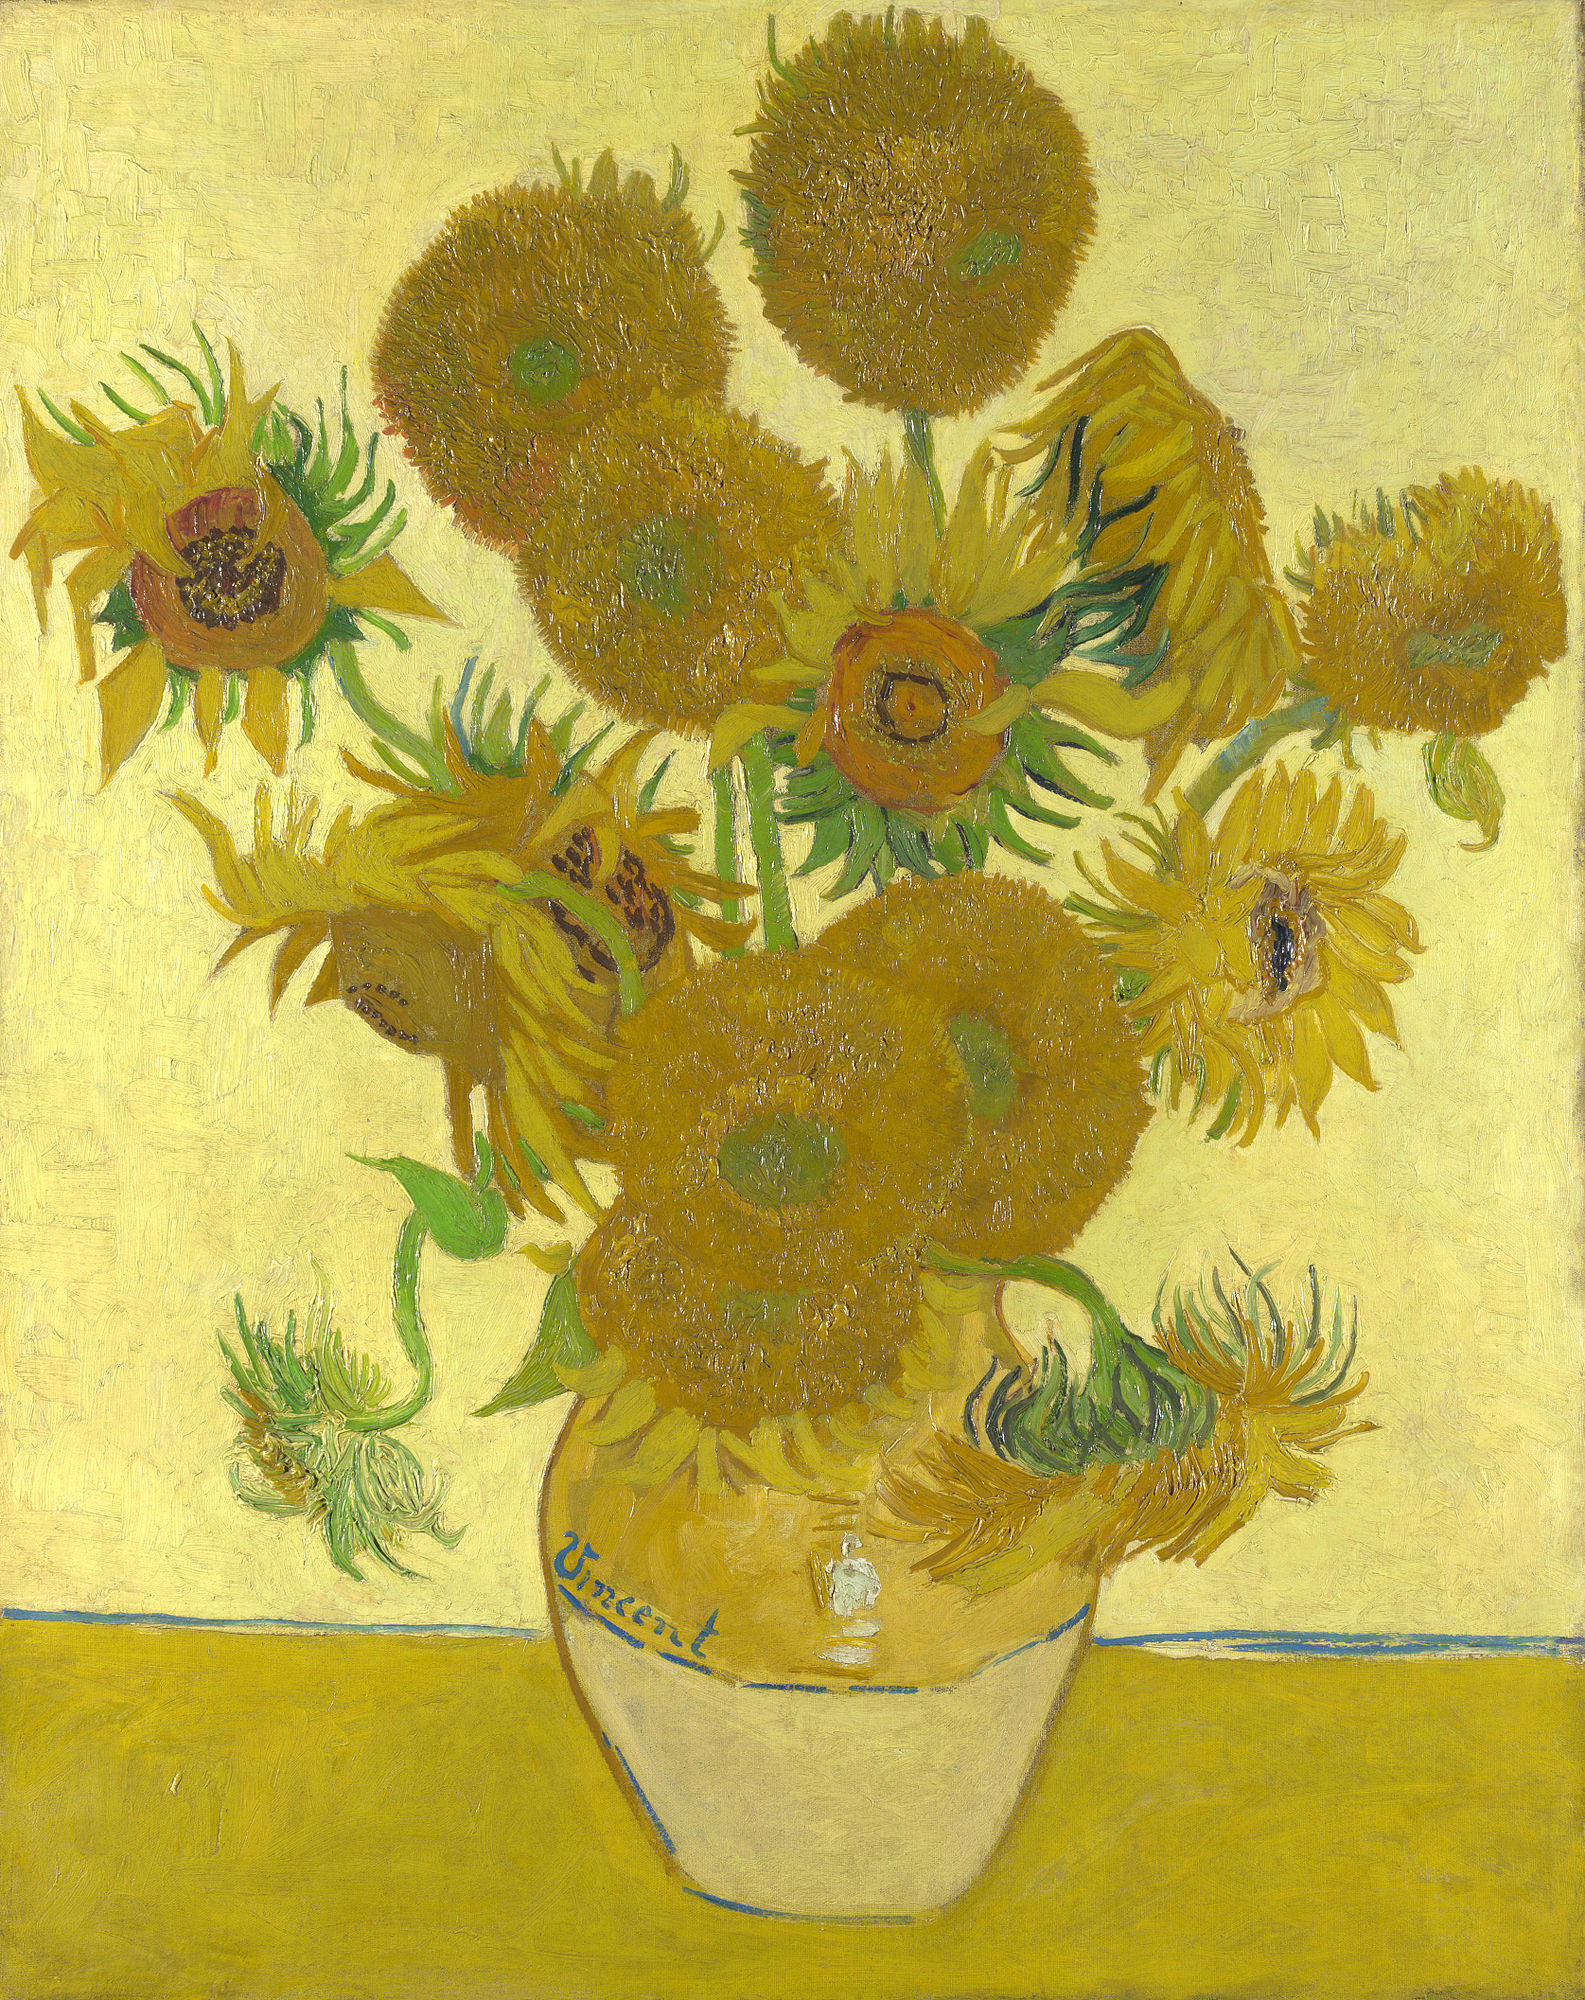 Sunflowers [Vincent van Gogh] | Sartle - See Art Differently